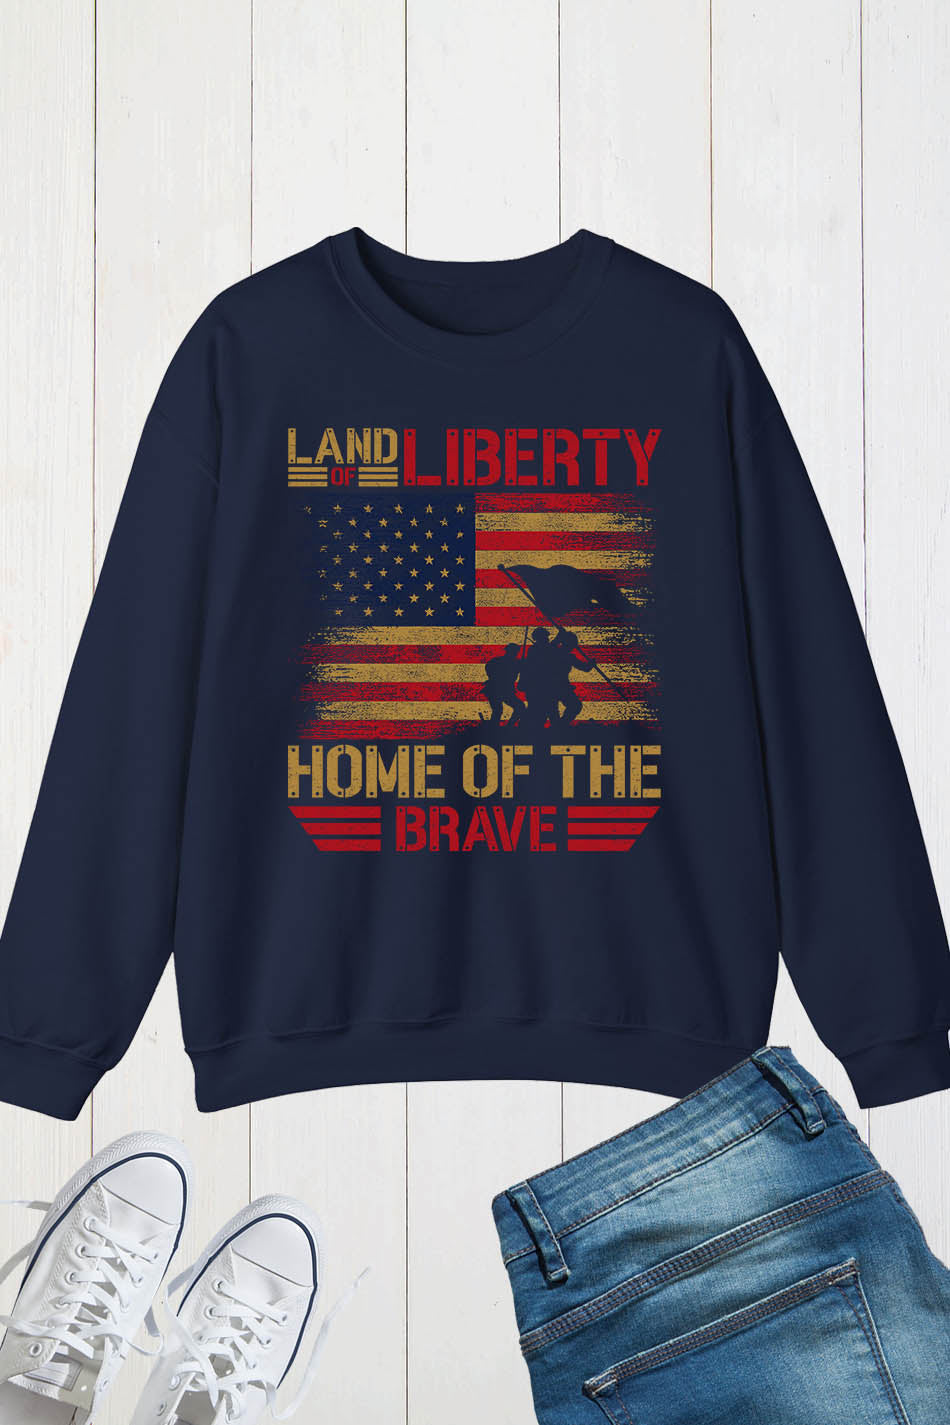 Land of Liberty Home of The Brave Sweatshirts